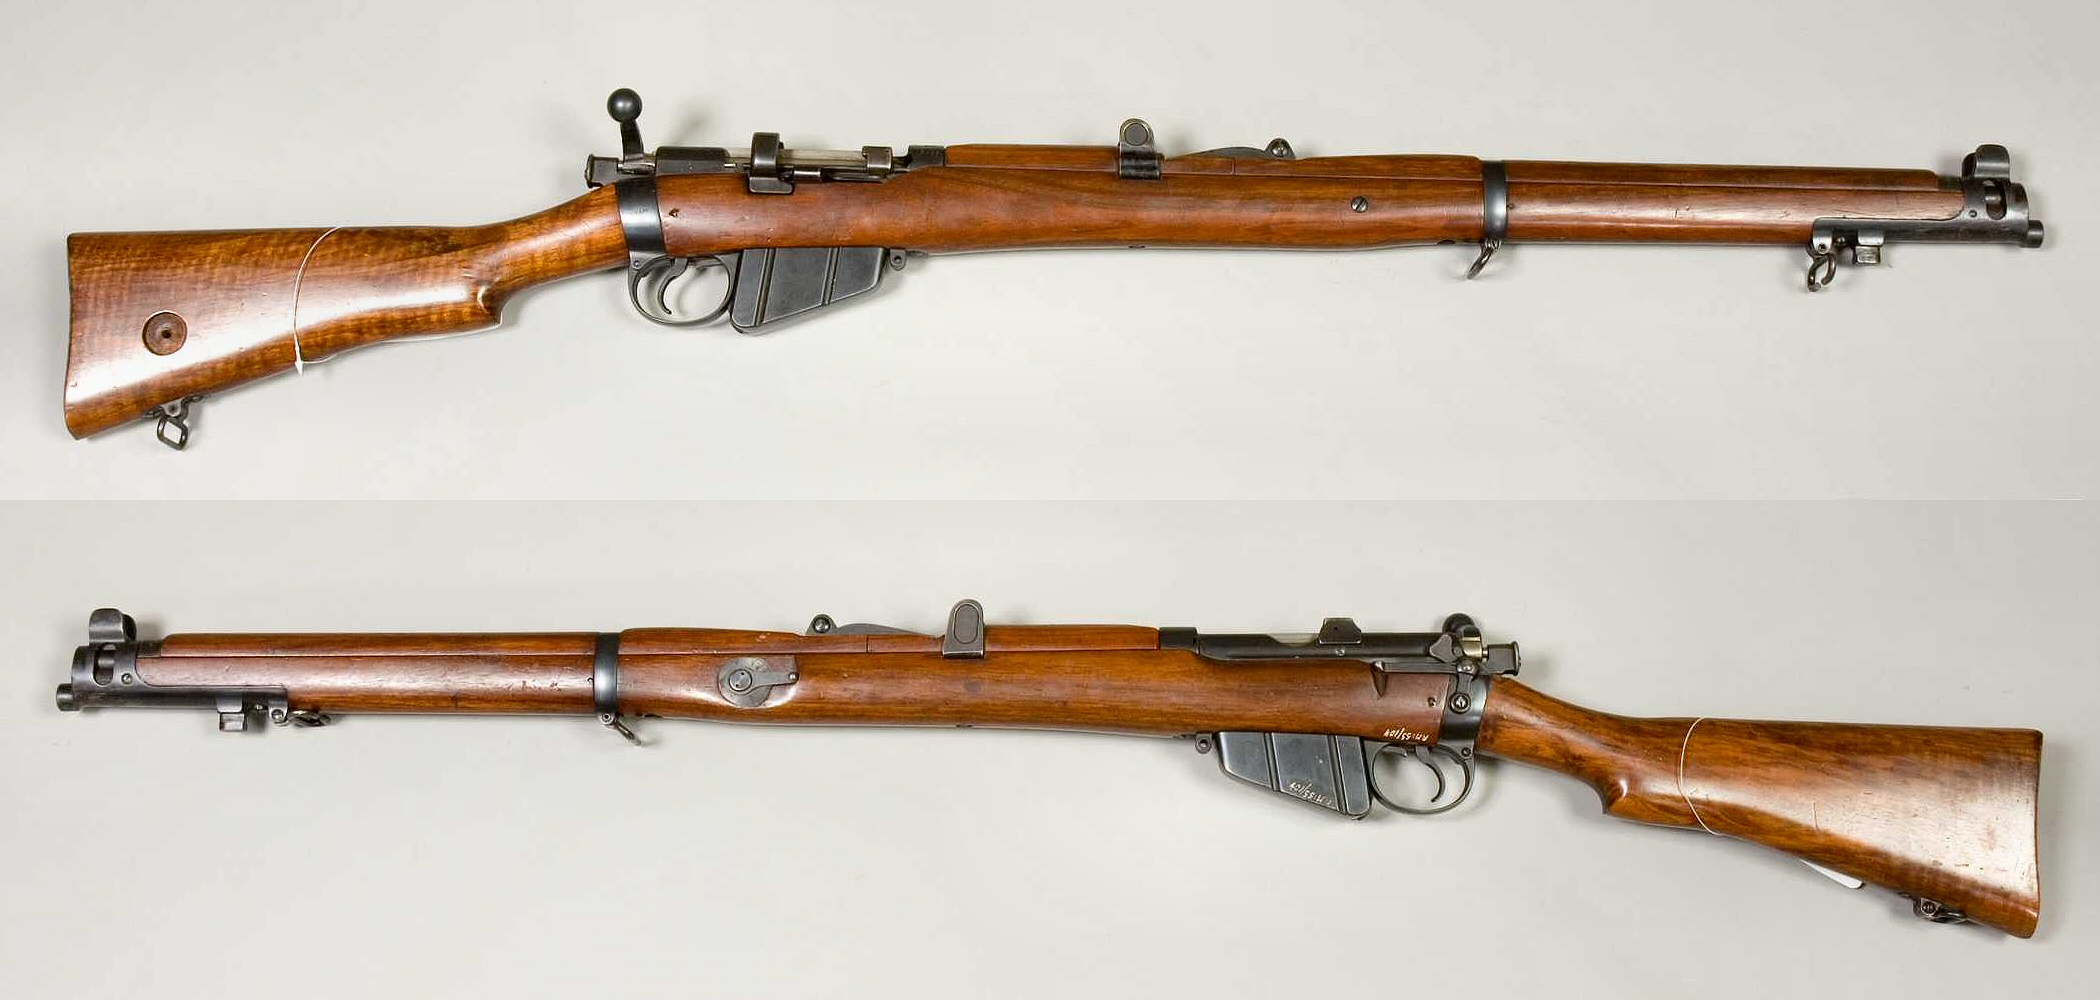 HQ Lee Enfield Mk Iii Rifle Background Images